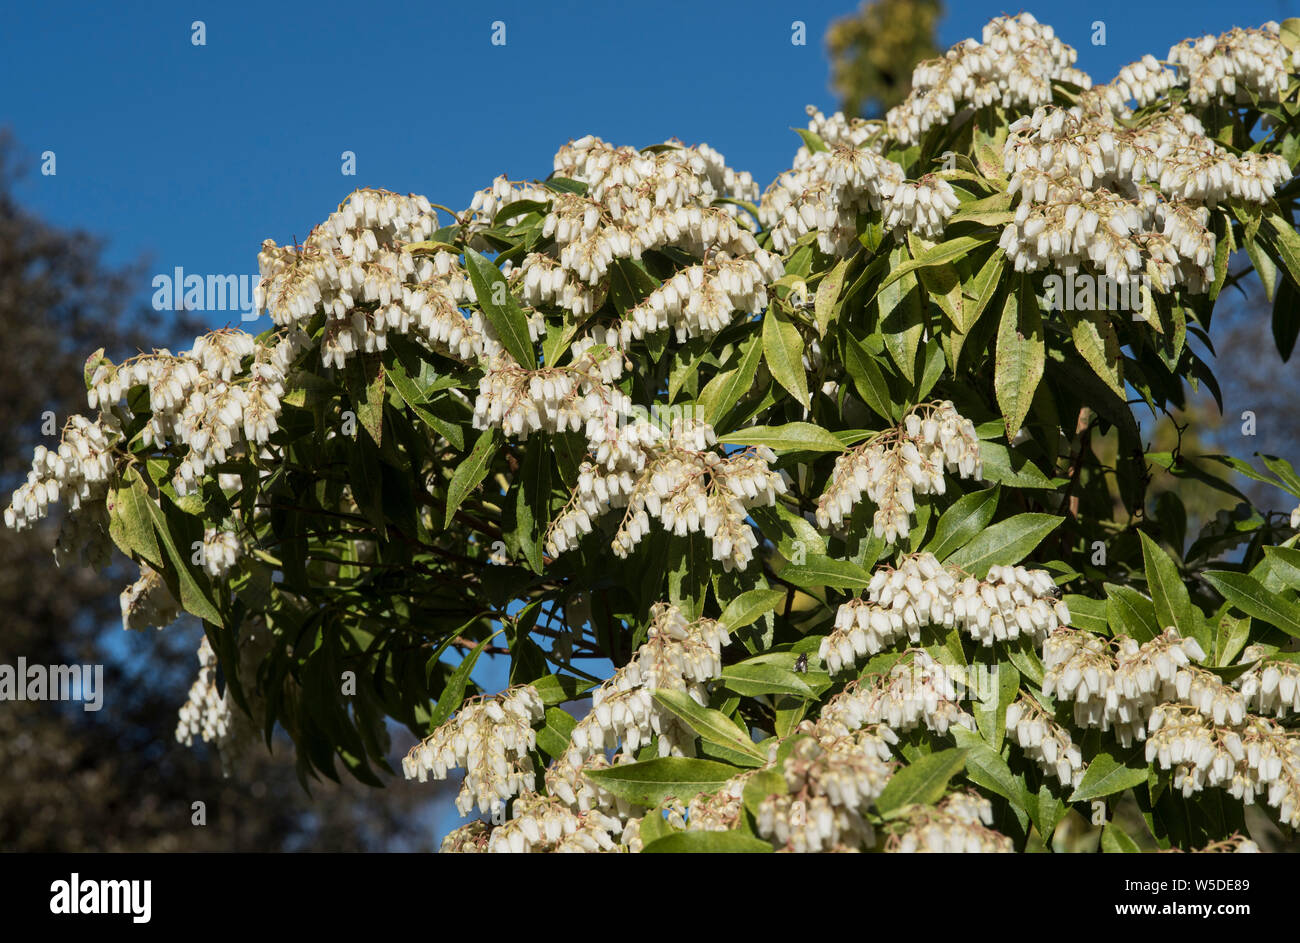 Japanese Andromeda - Pieris Japonica aka Dwarf Lily of the Valley shrub. Laden with white / cream urn-shaped flowers in panicles in early Spring. Stock Photo